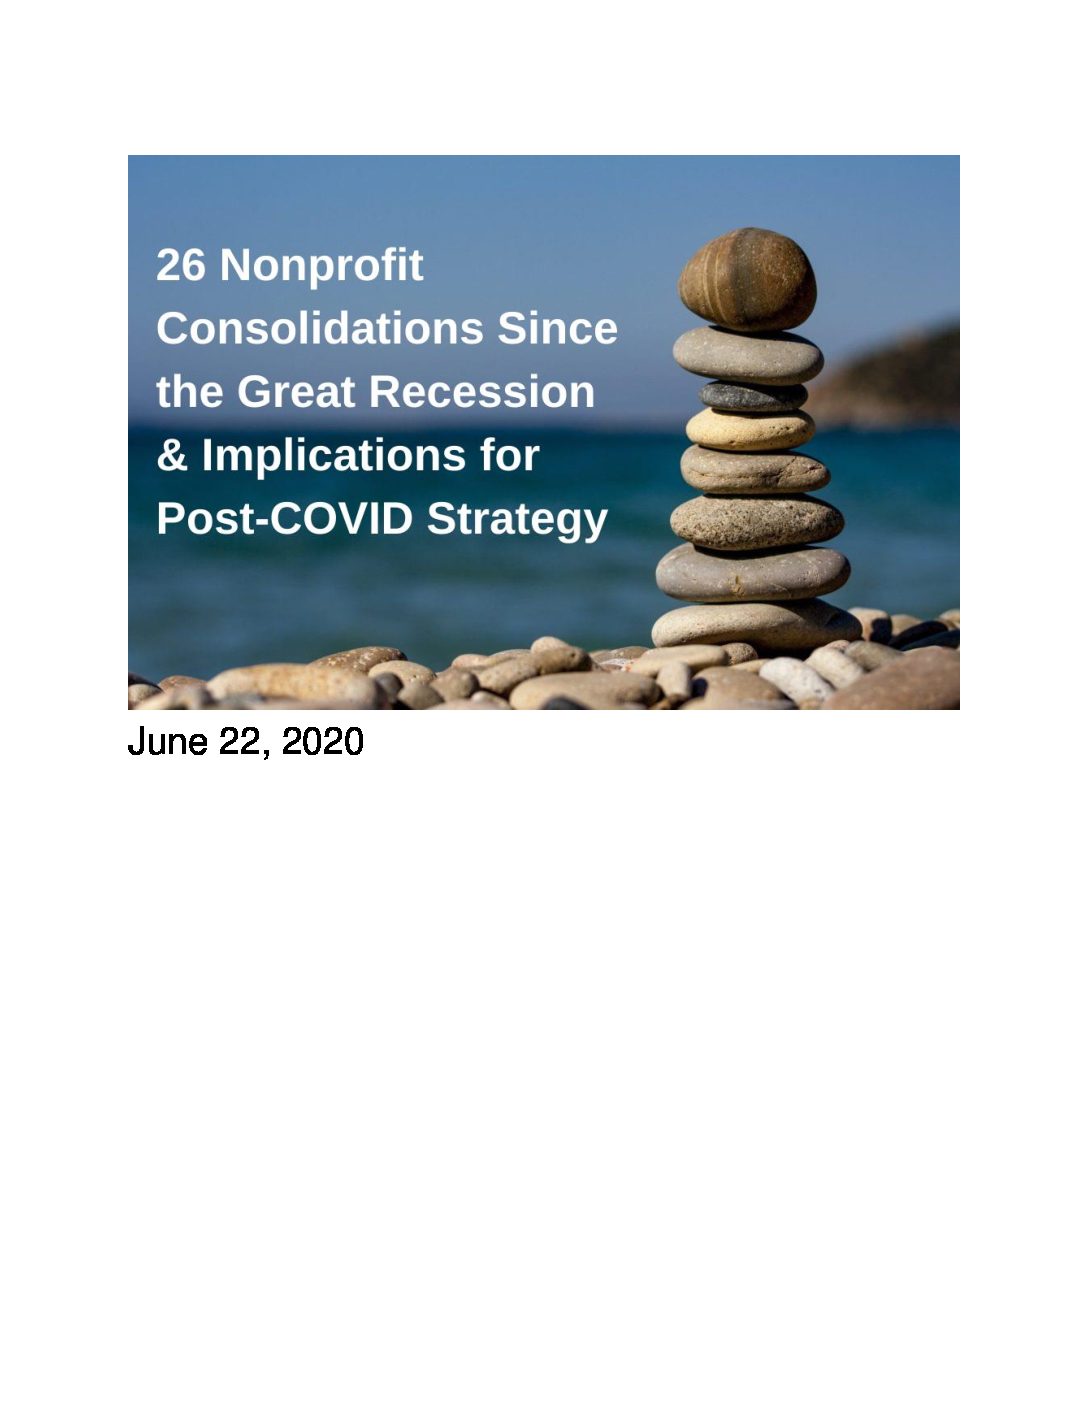 26 Nonprofit Consolidations Since the Great Recession & Implications for Post-COVID Strategy